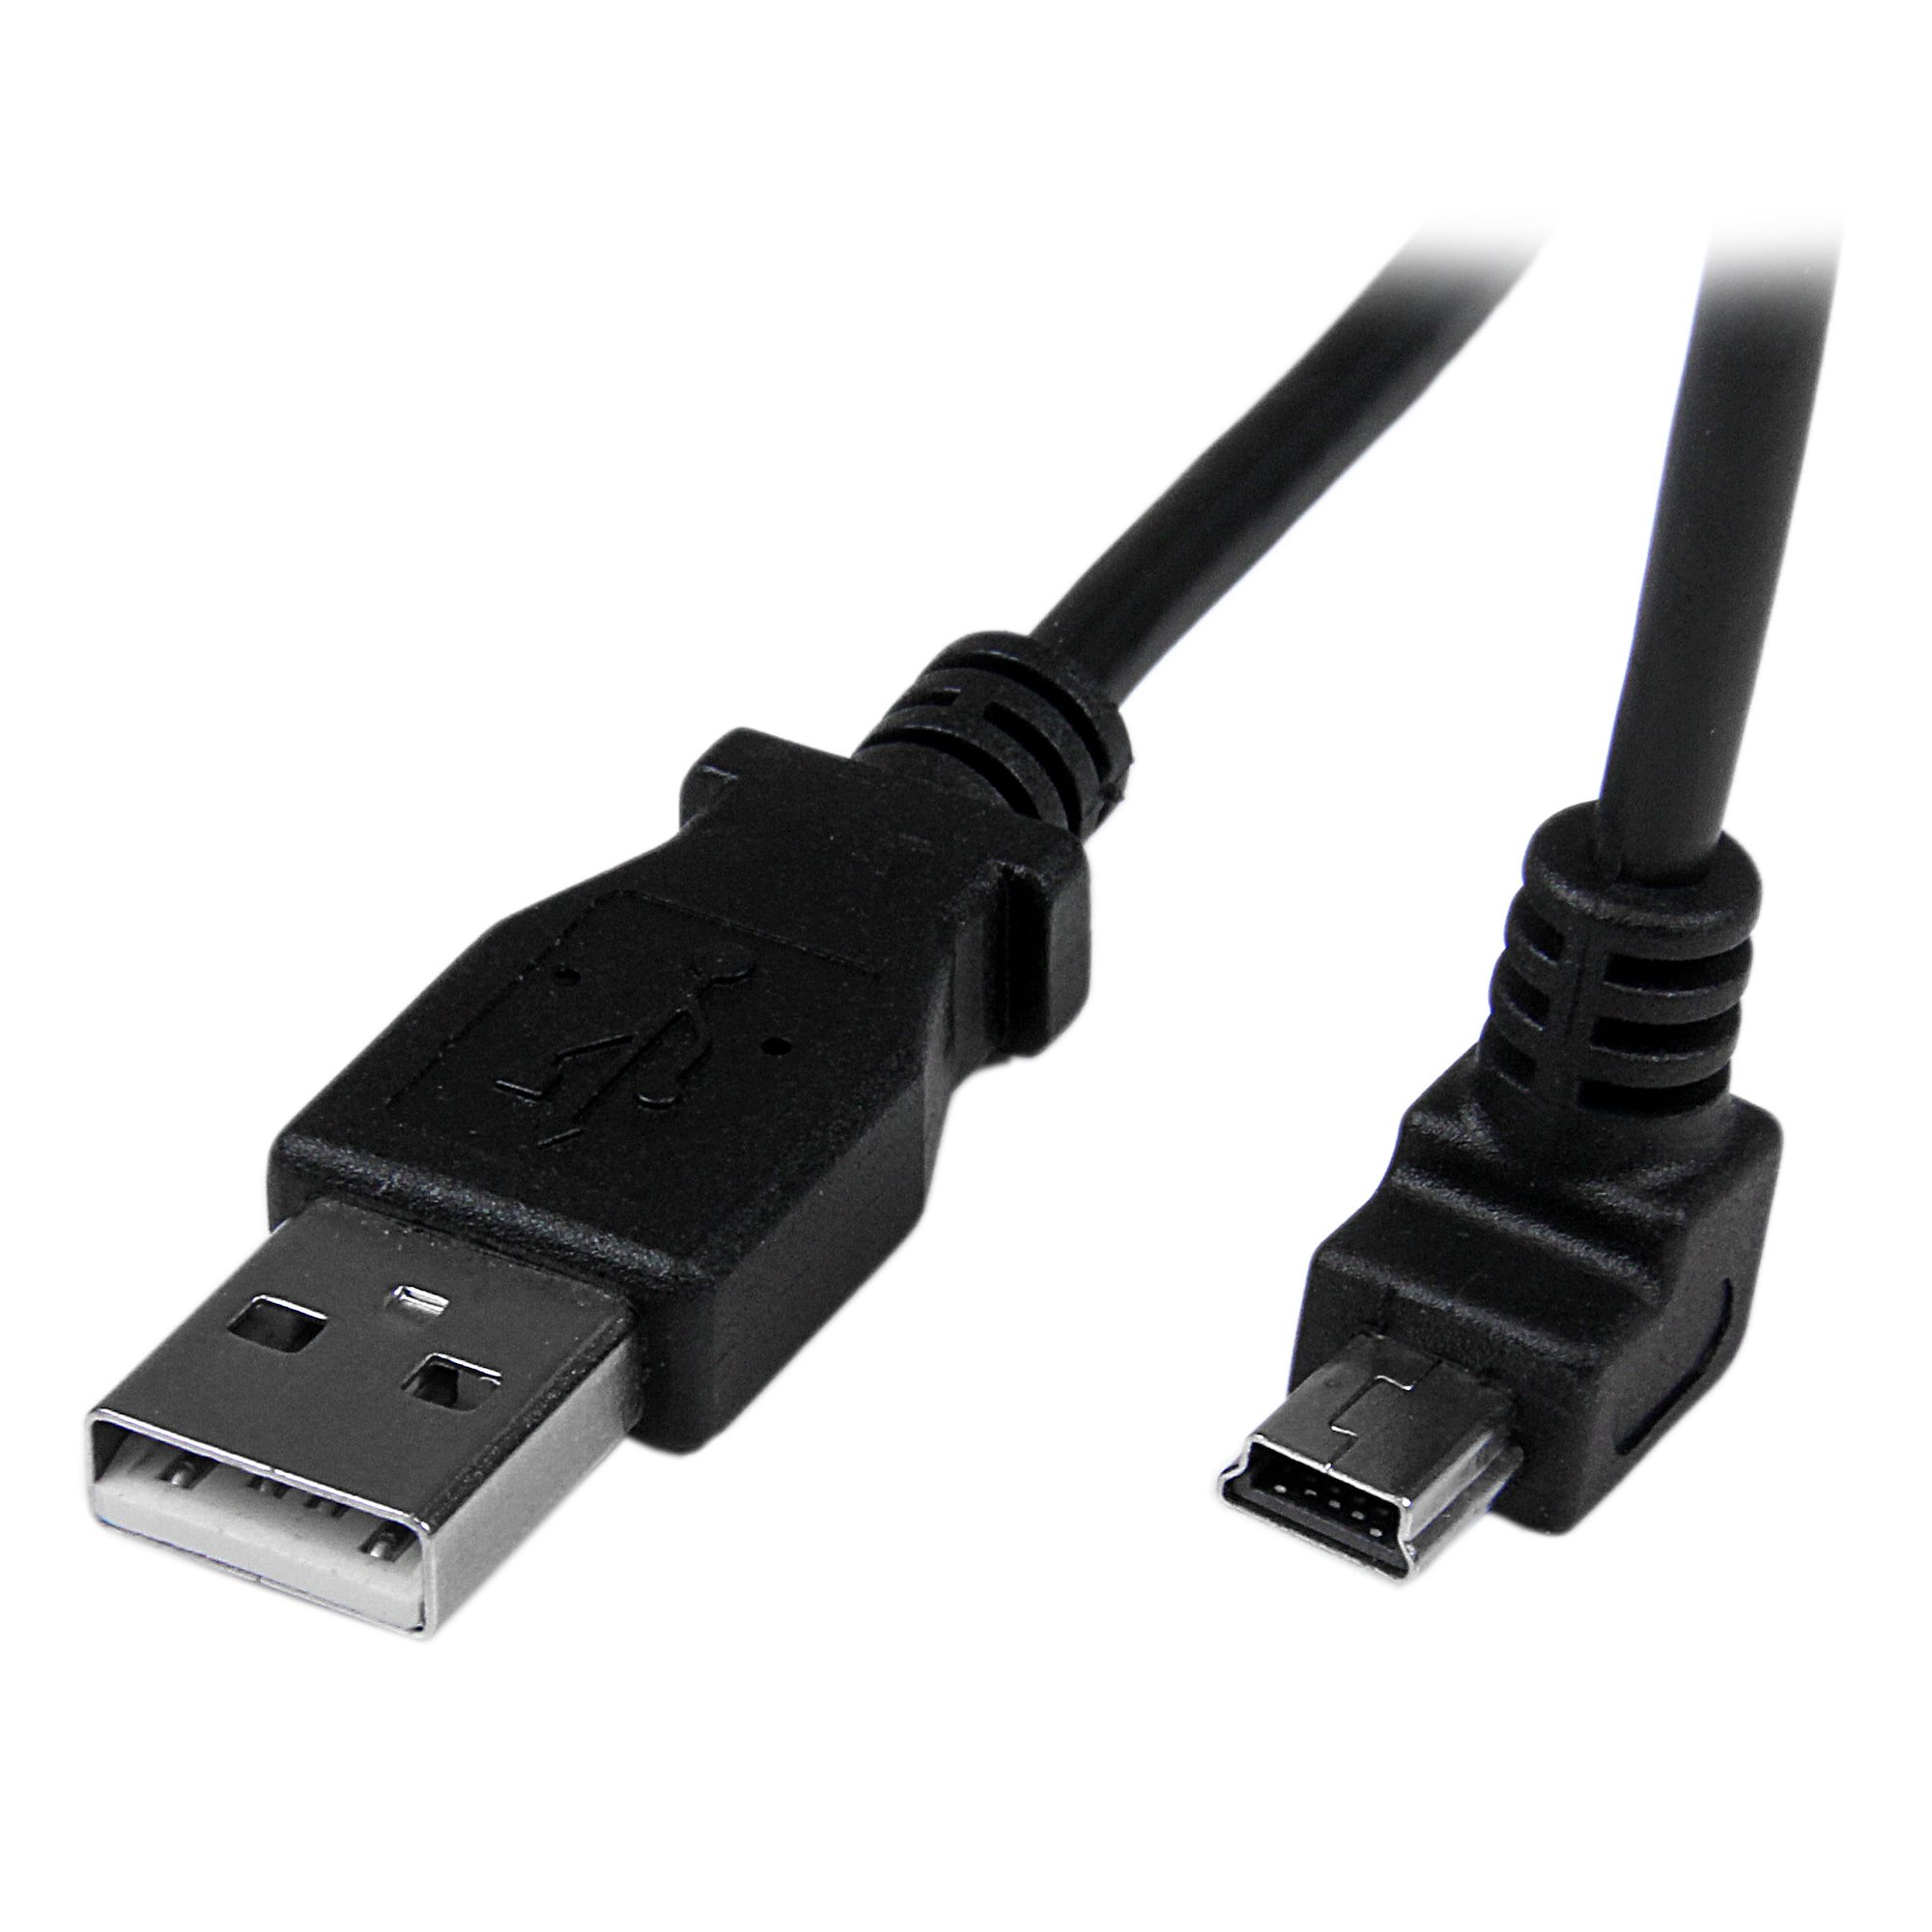 2m USB to Down Angle Mini USB Cable - Mini USB Cables & Adapters